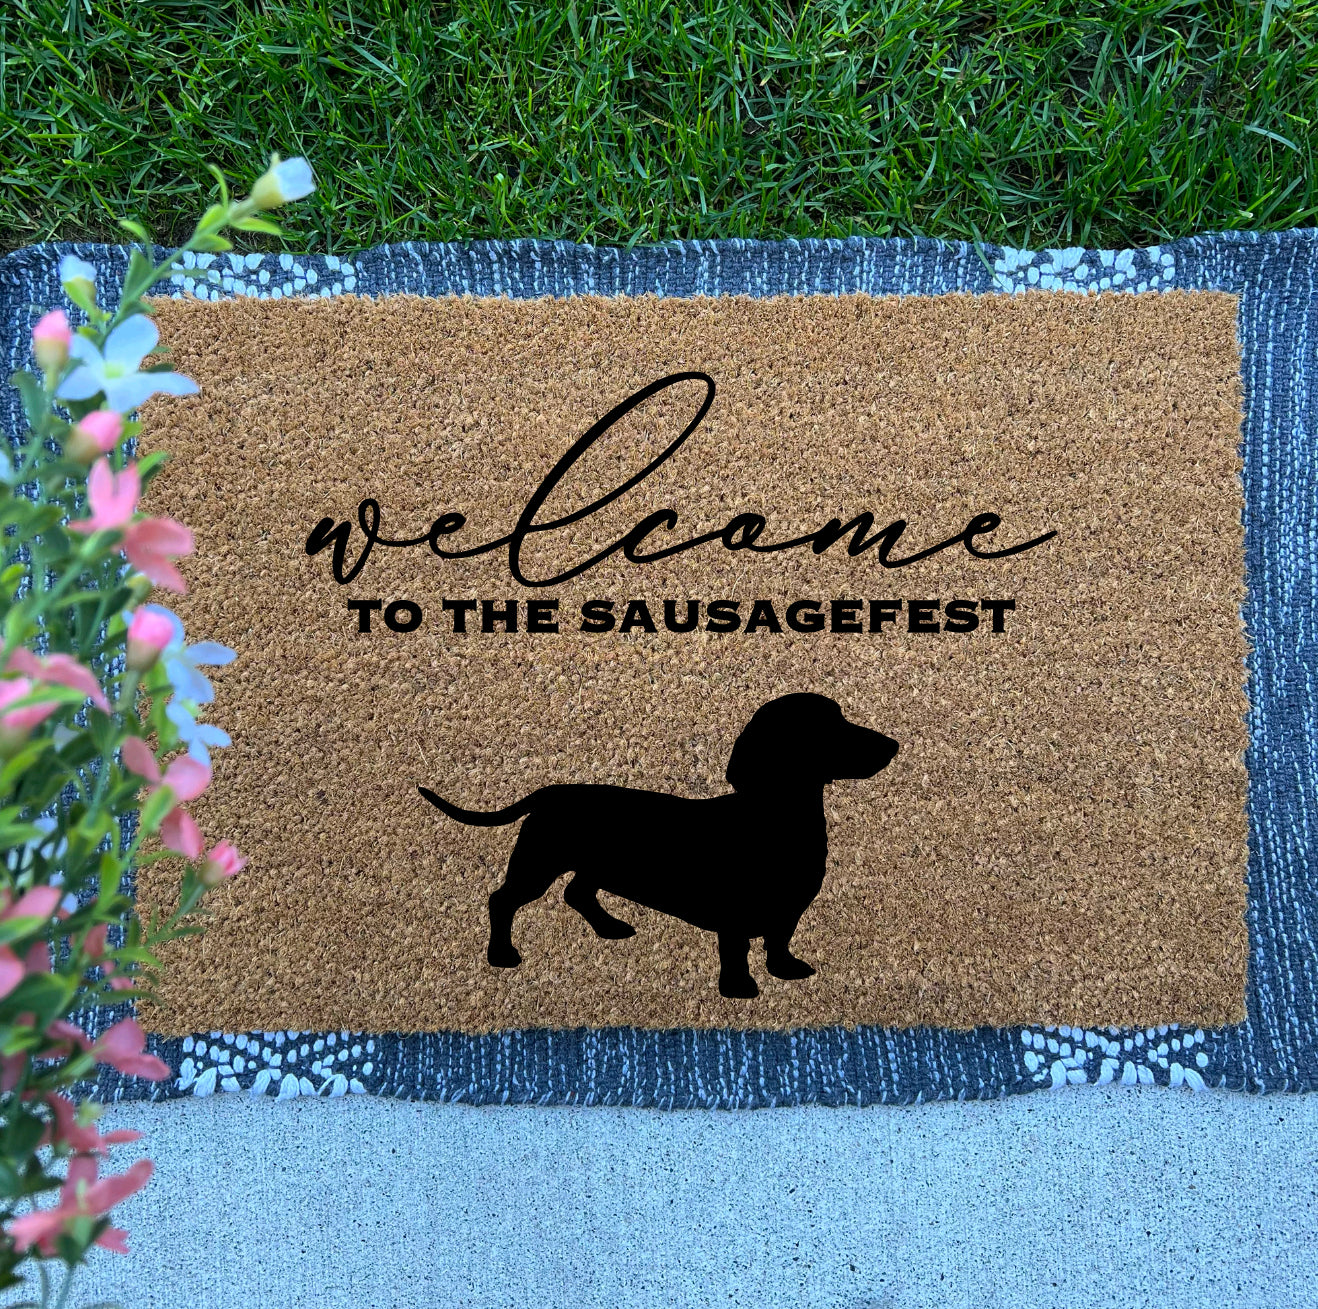 Welcome to the Sausagefest